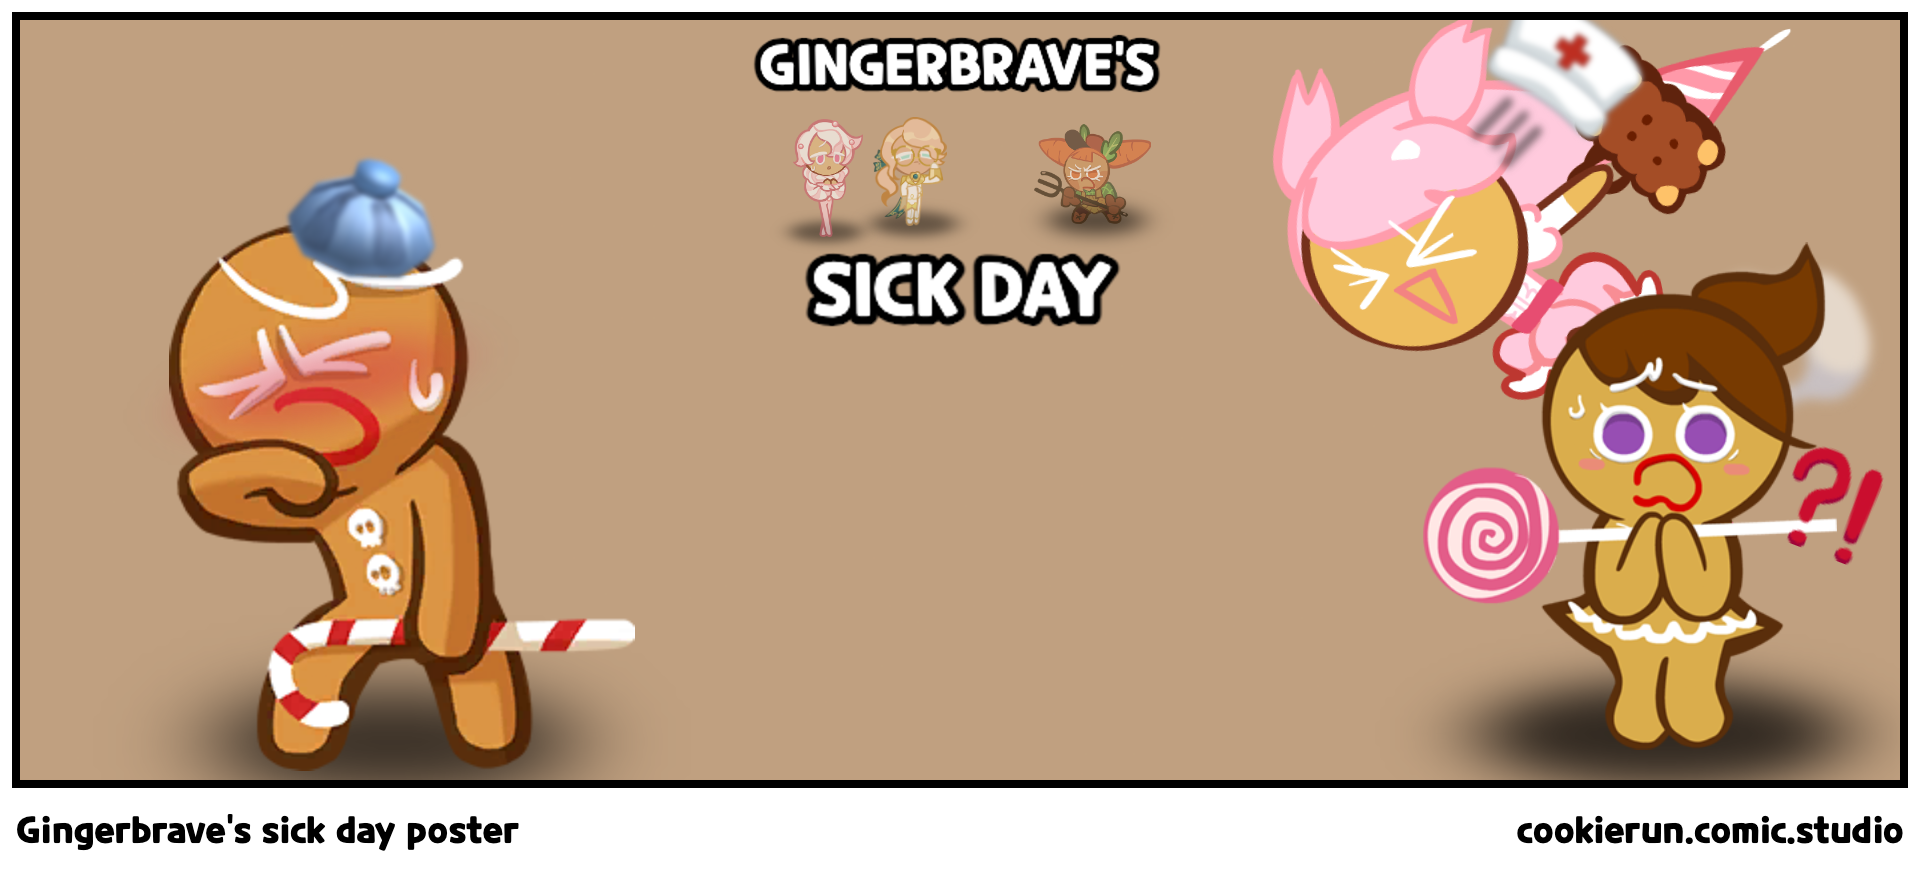 Gingerbrave's sick day poster